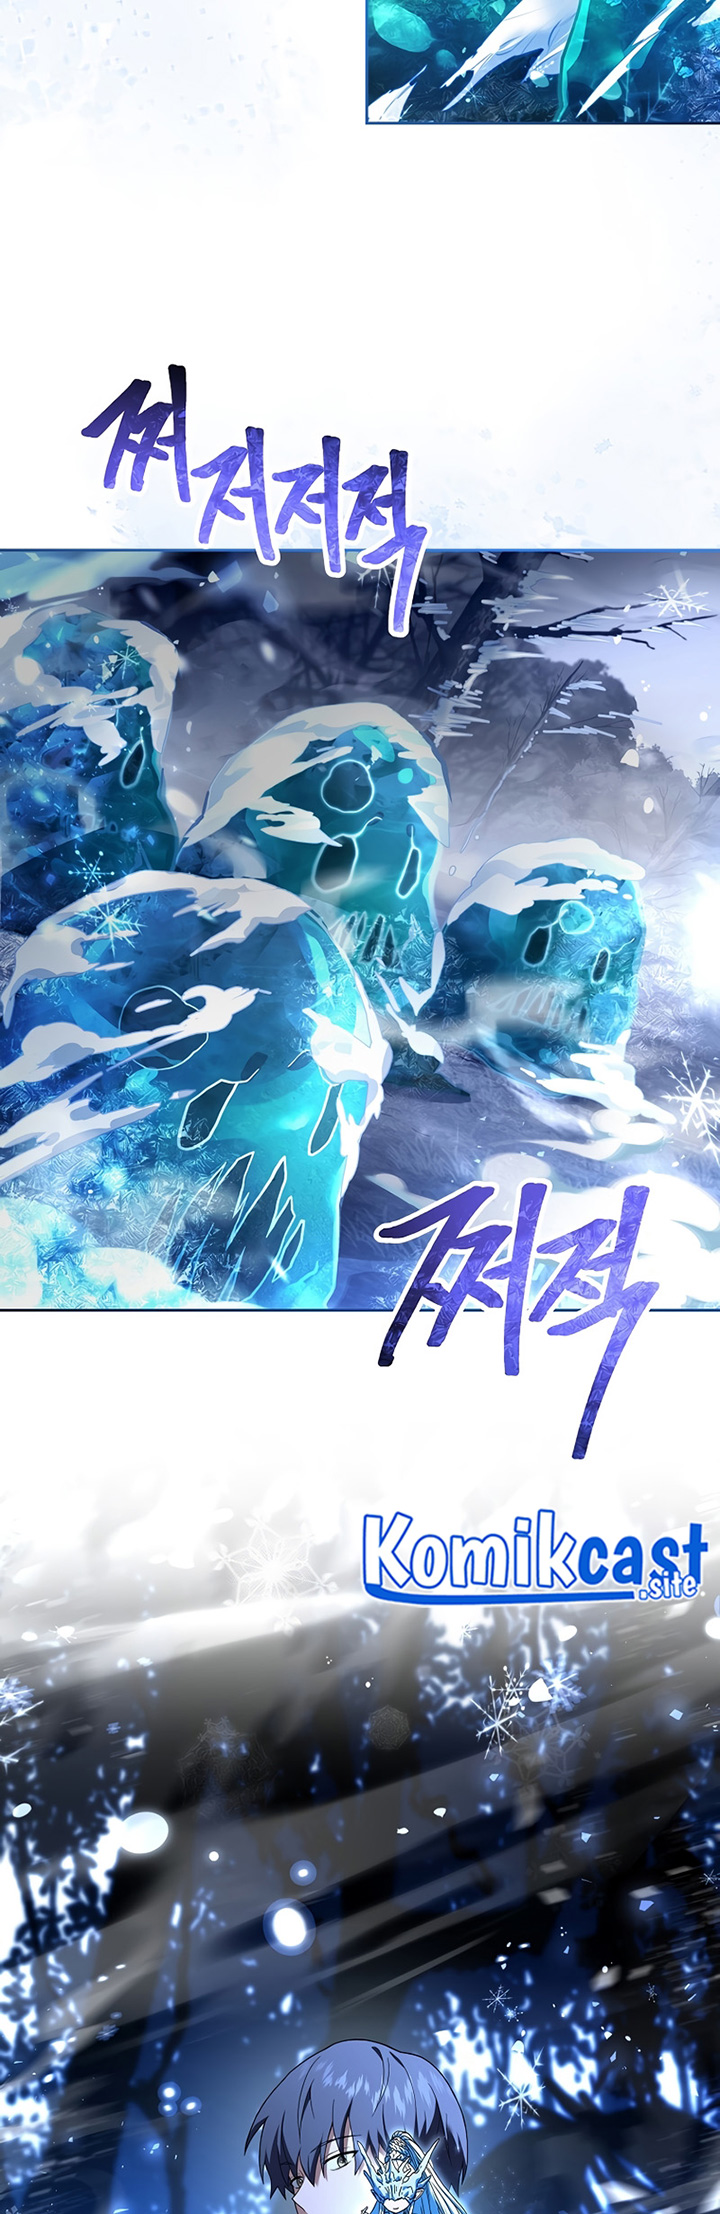 Return Of The Frozen Player Chapter 83